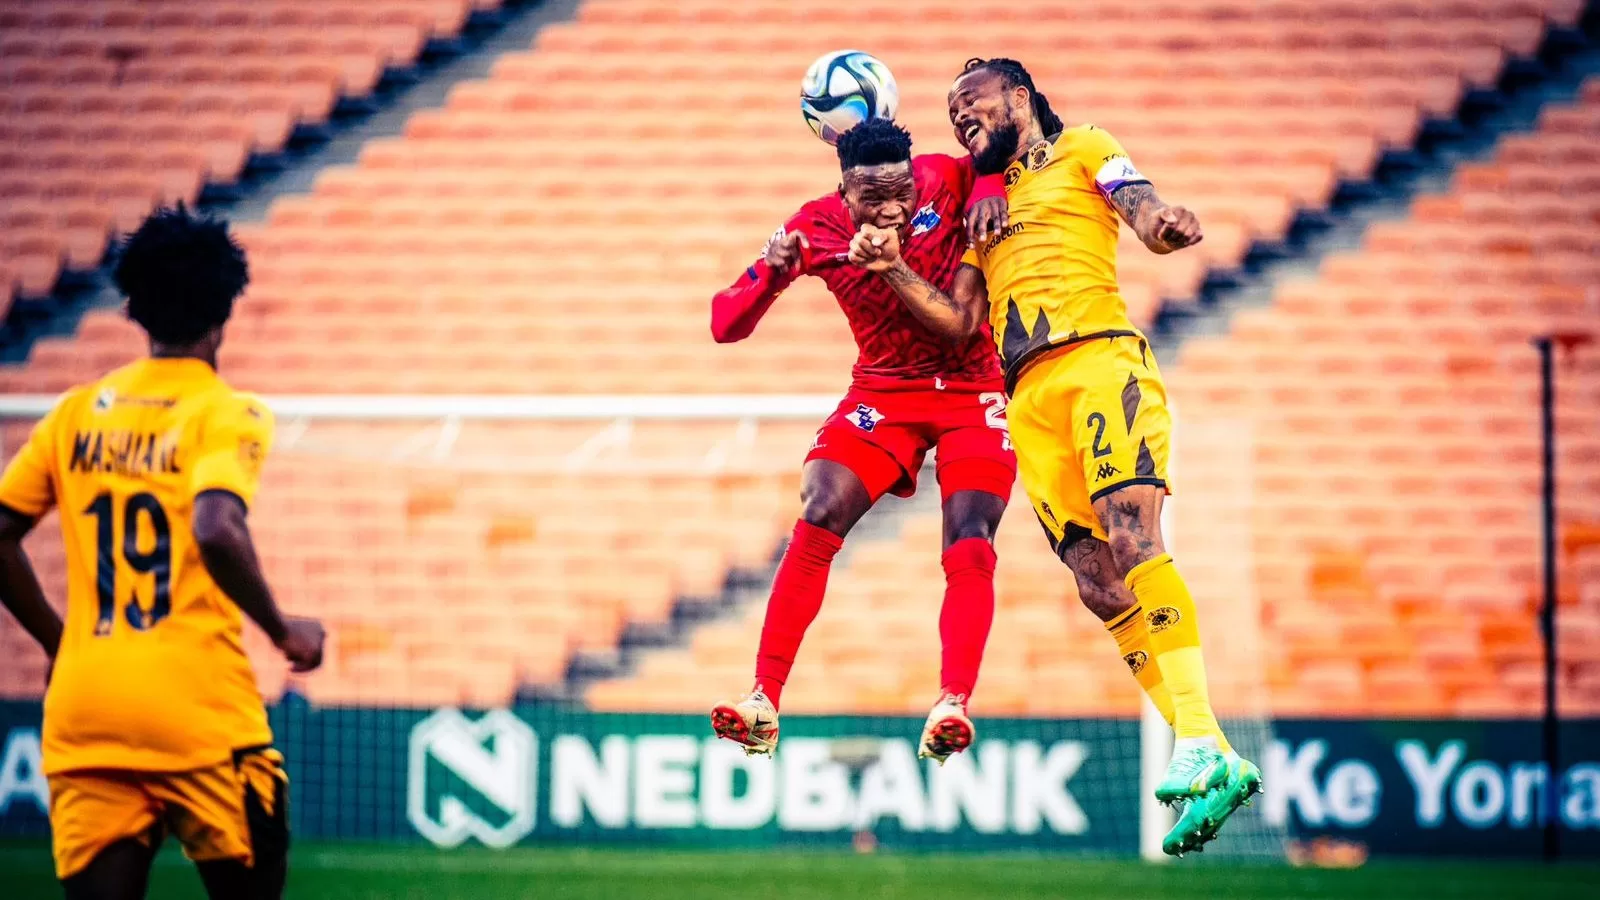 Kaizer Chiefs have been knocked out of the Nedbank Cup f